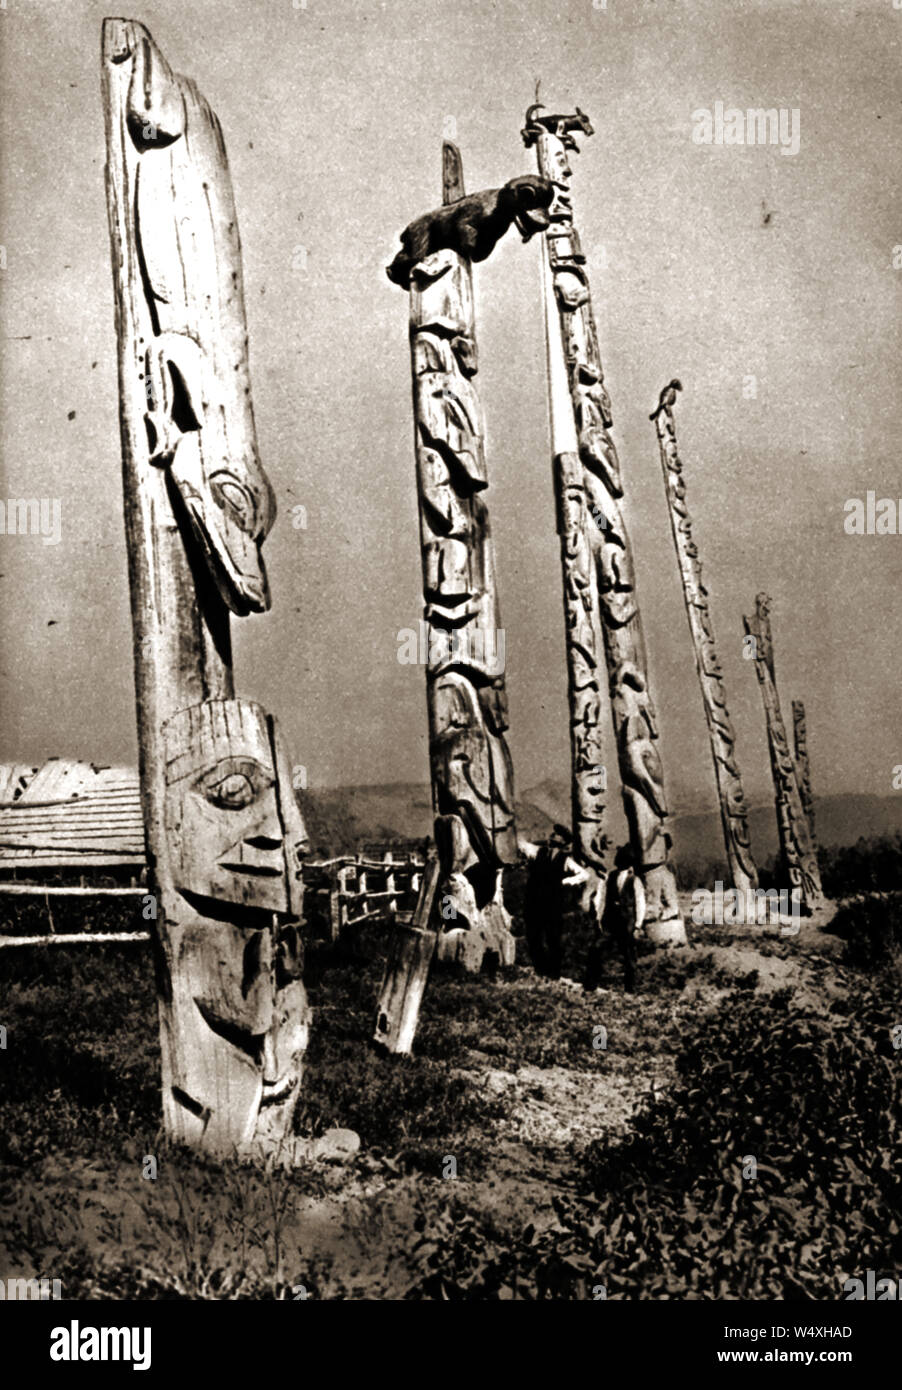 Circa 1940 - U.S.  Native Red Indian carved family (house) totem poles (location unknown) - Size can be estimated by the two human figures standing below one Stock Photo